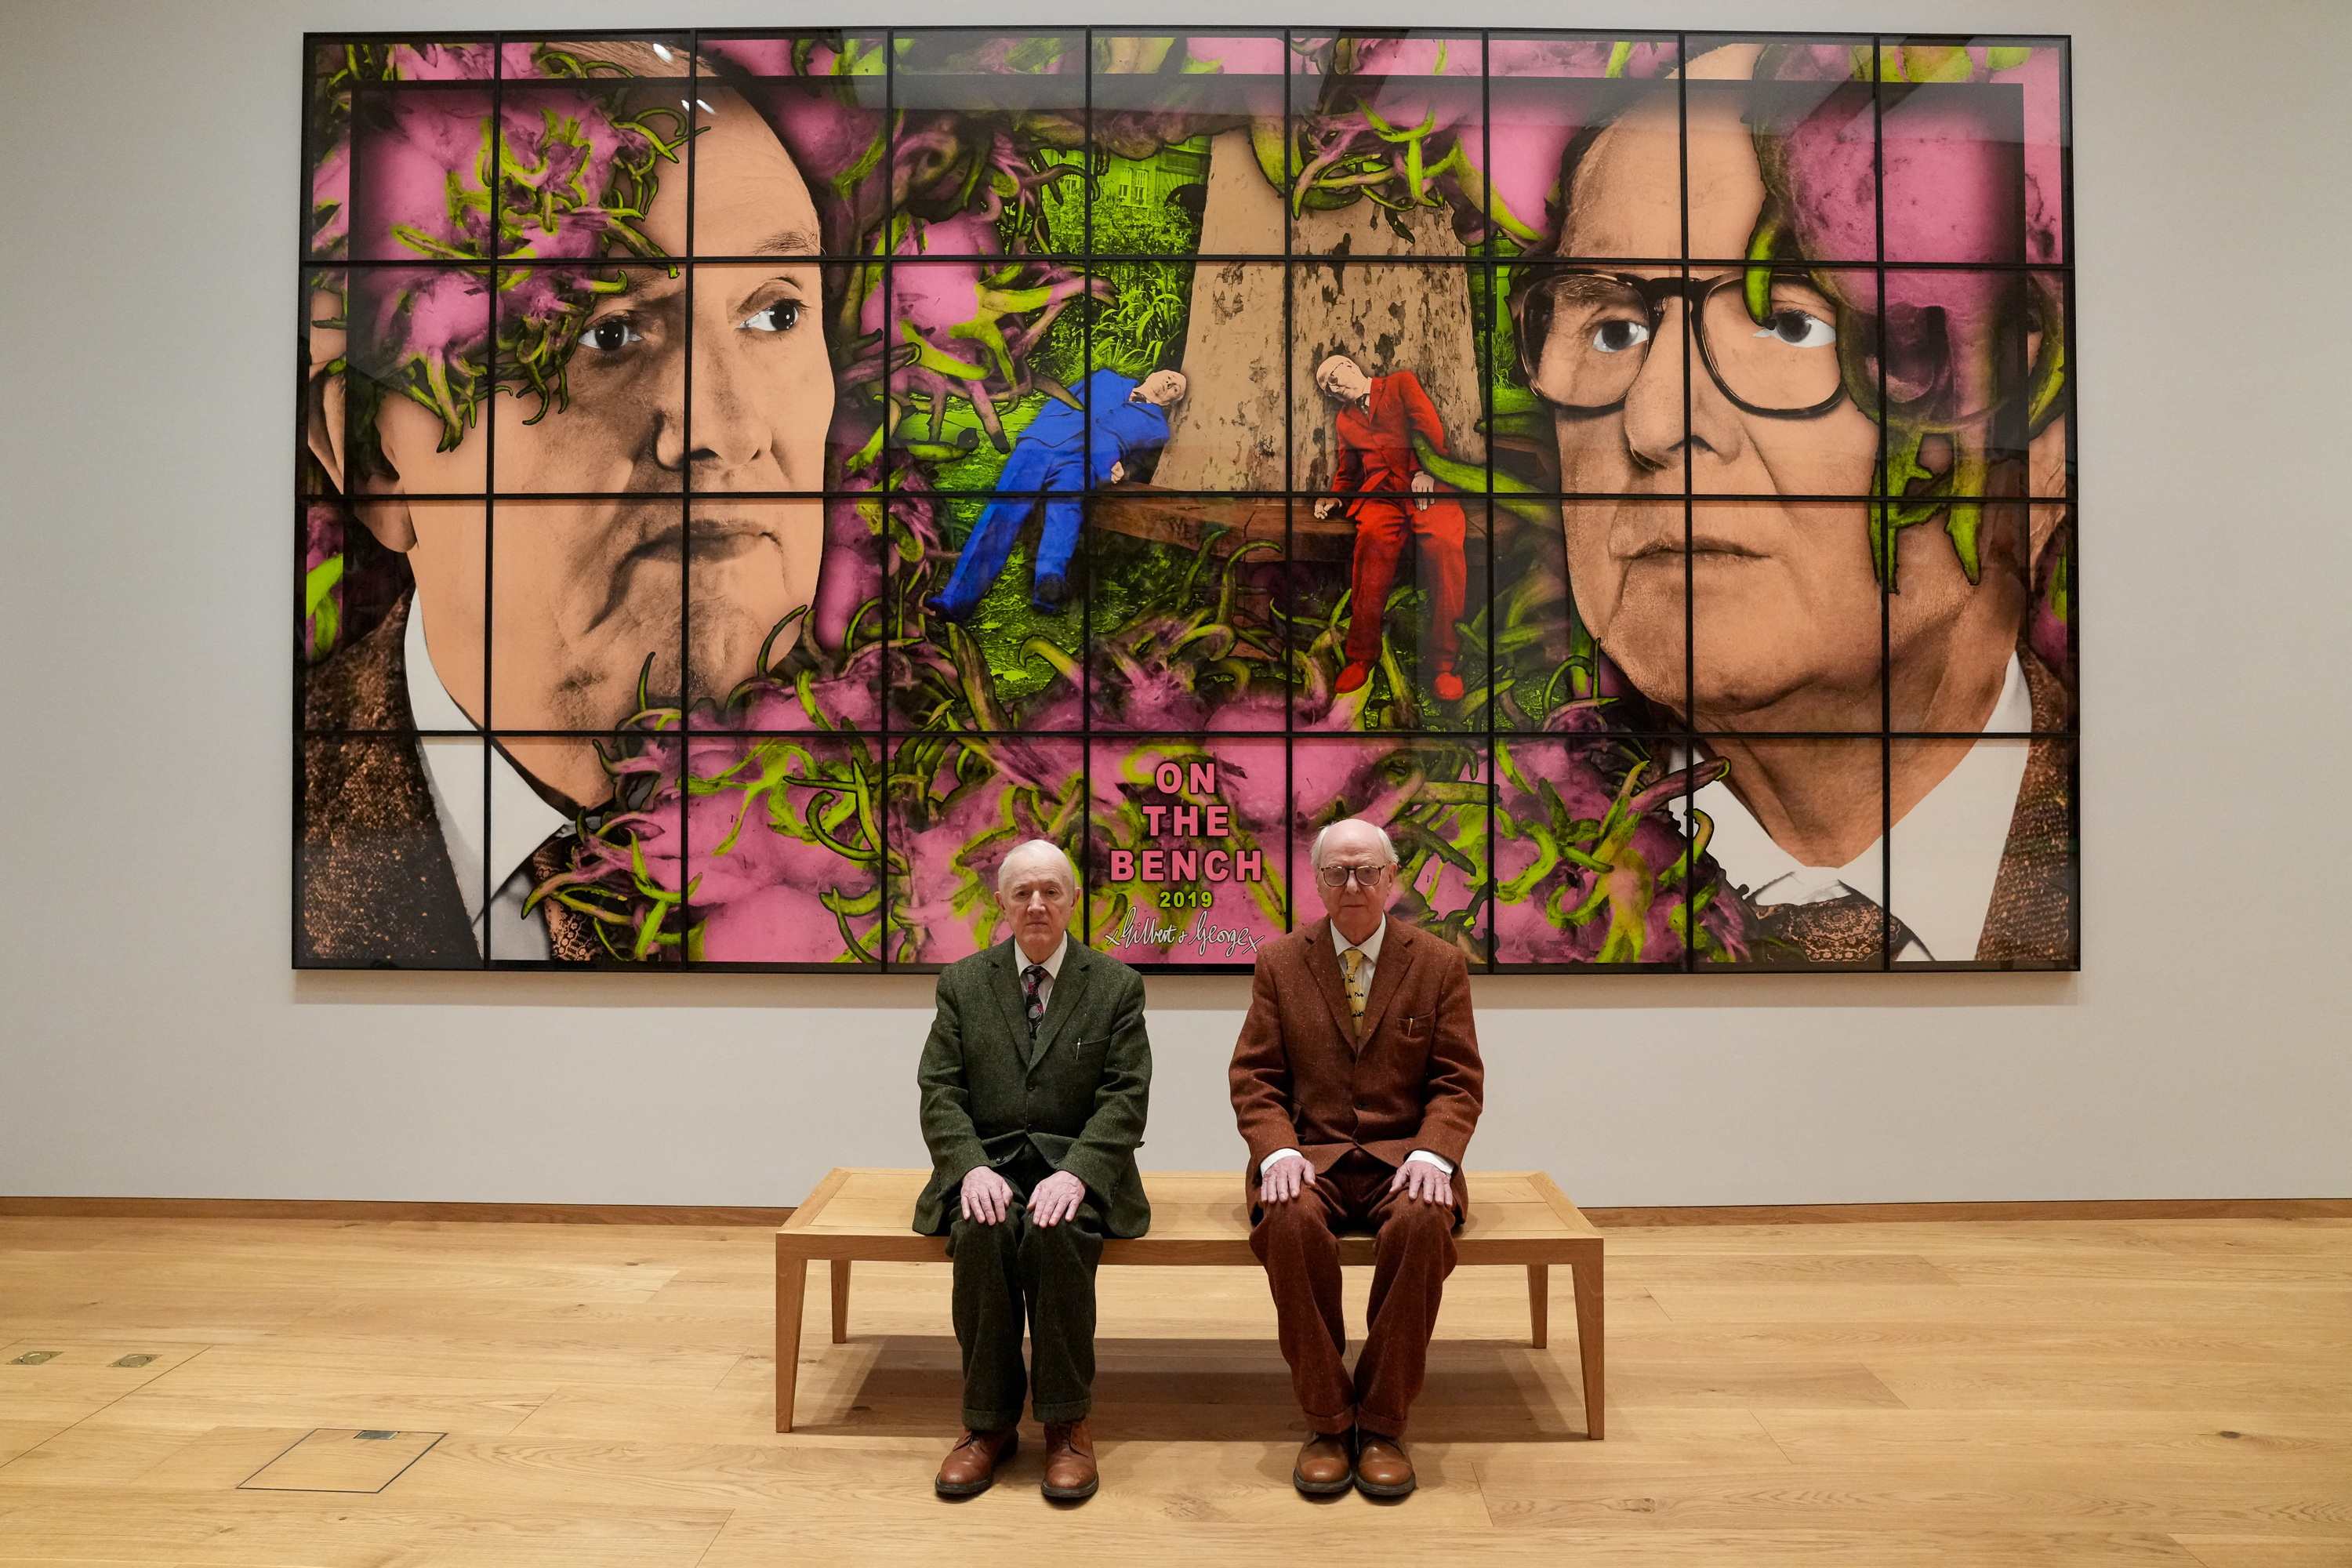 Art duo Gilbert & George debut 'The Gilbert & George Centre' a permanent home for their artworks in East London.